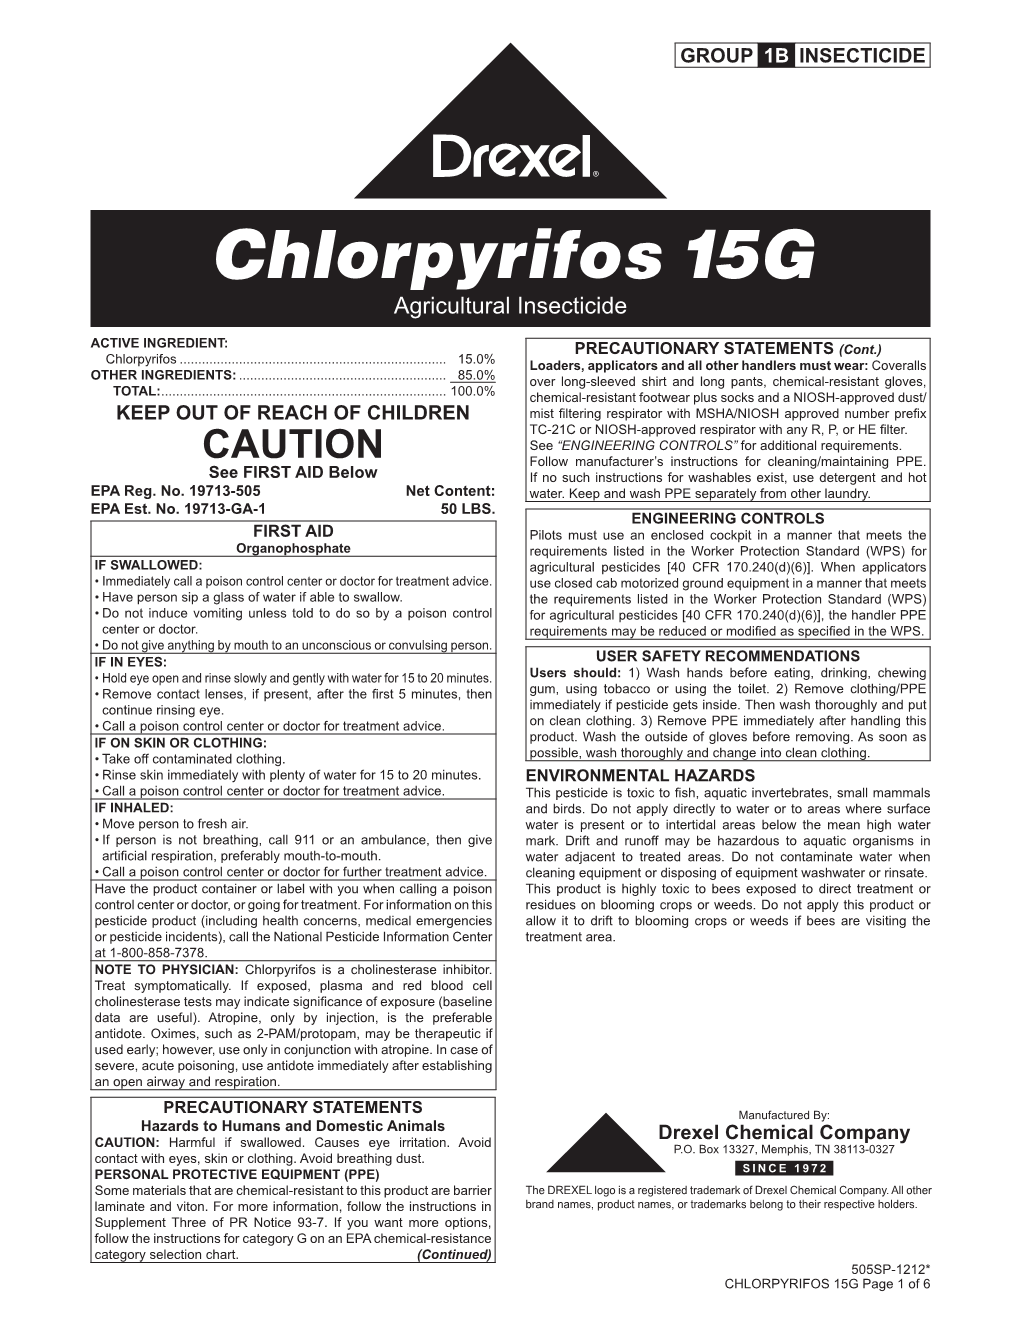 Chlorpyrifos 15G Agricultural Insecticide